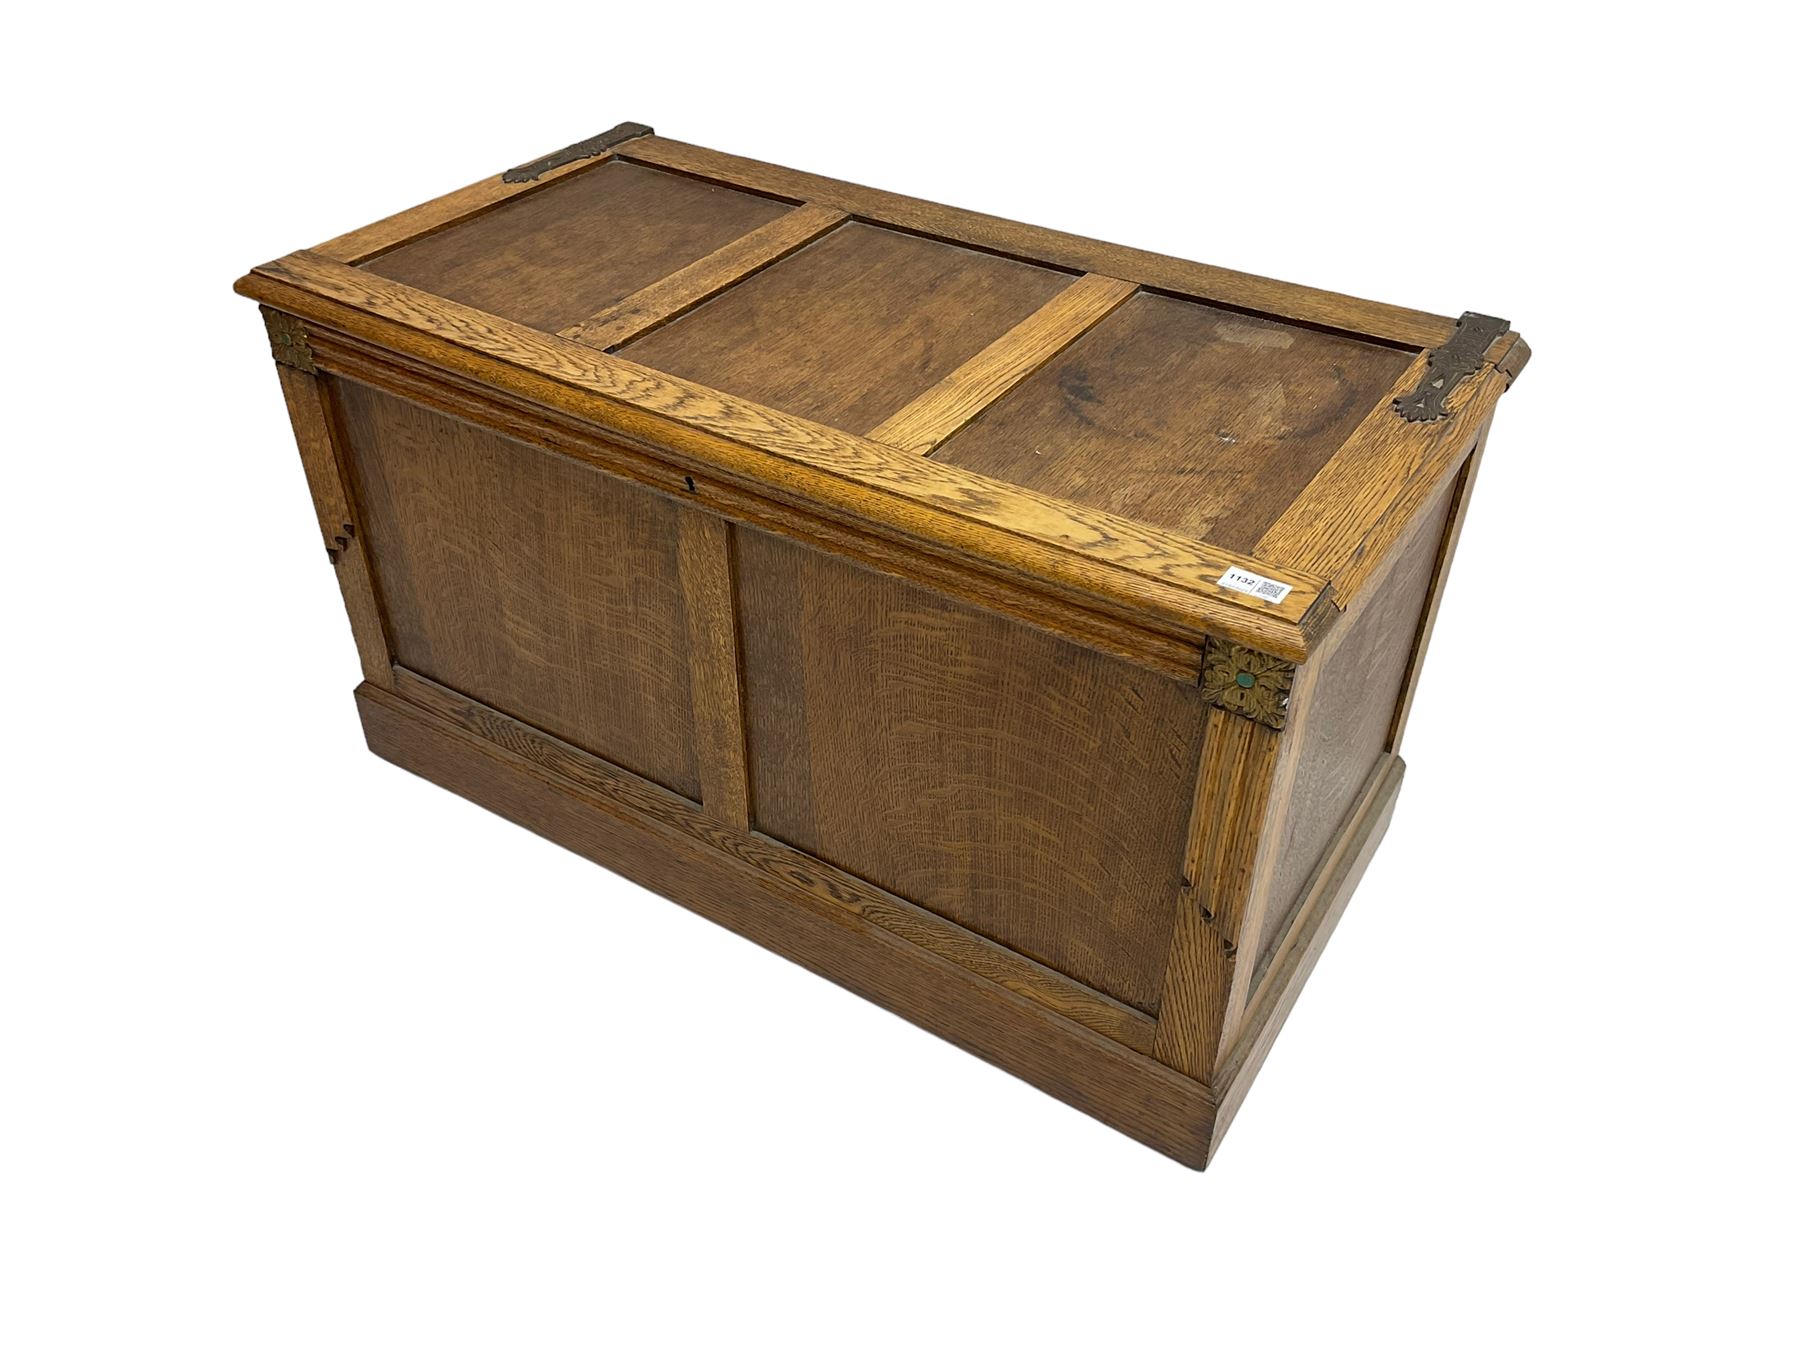 Arts and Crafts oak panelled chest or coffer - Image 6 of 7